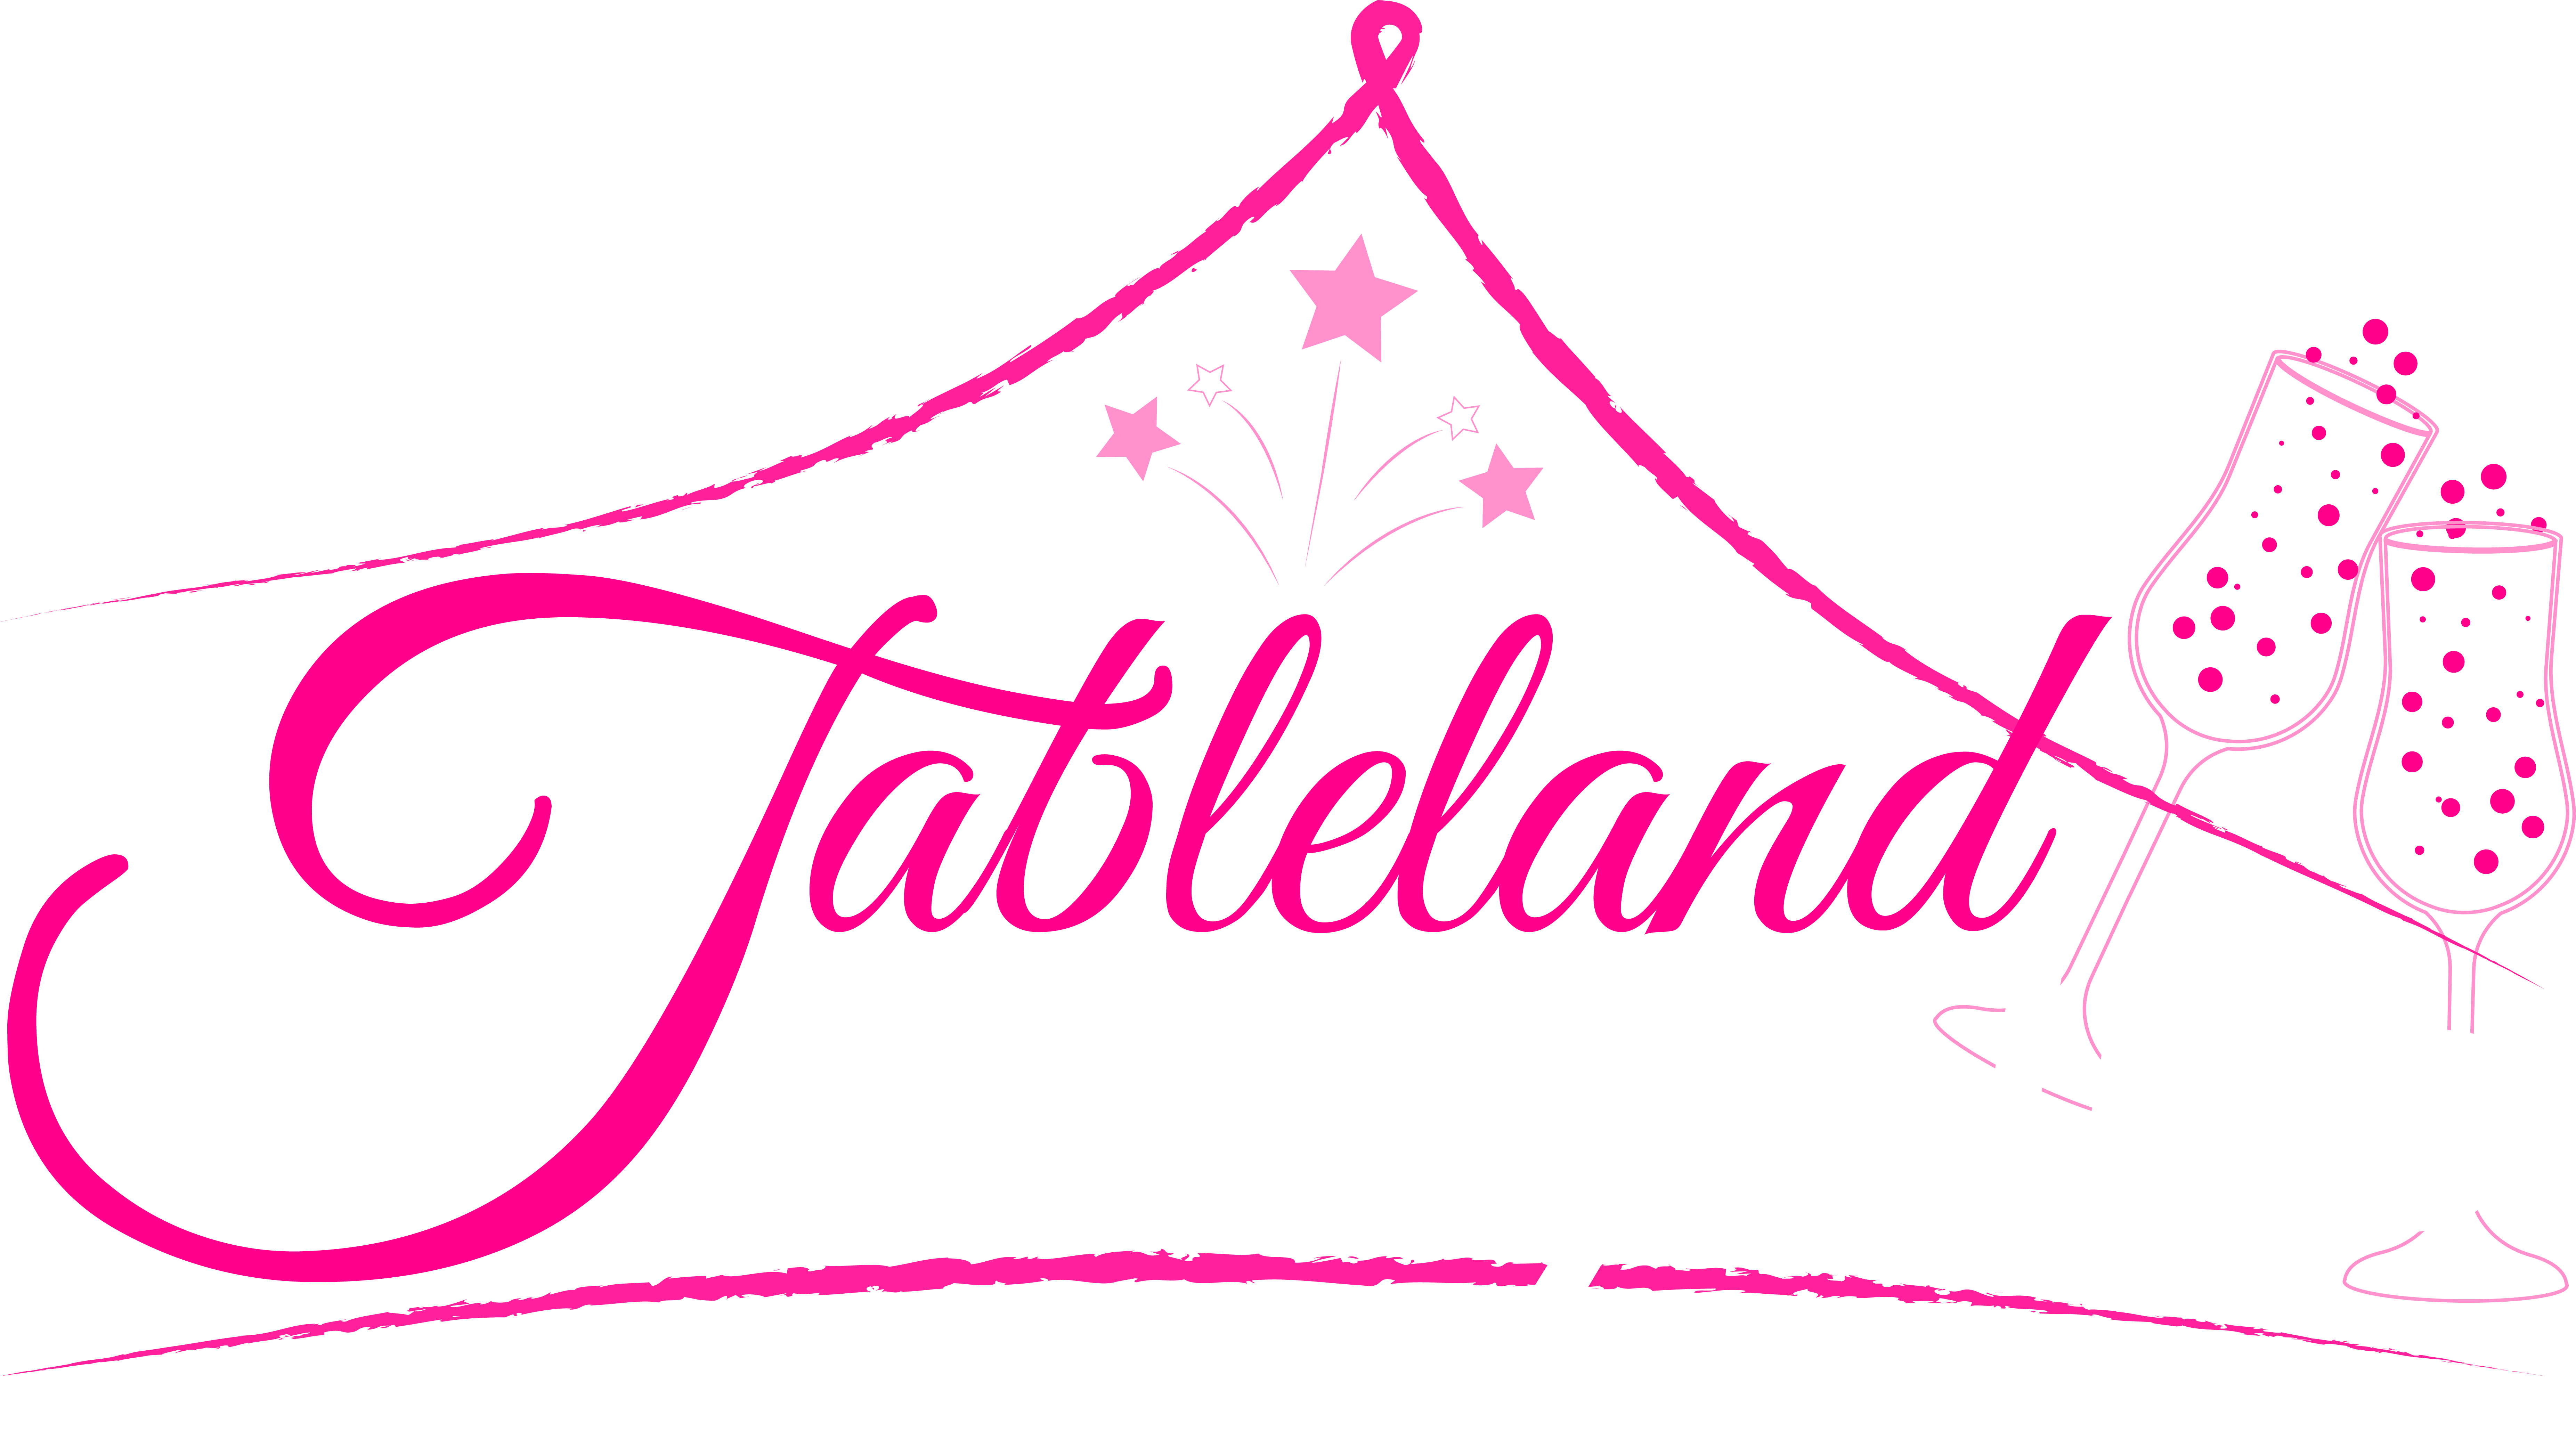 Tableland Party Hire